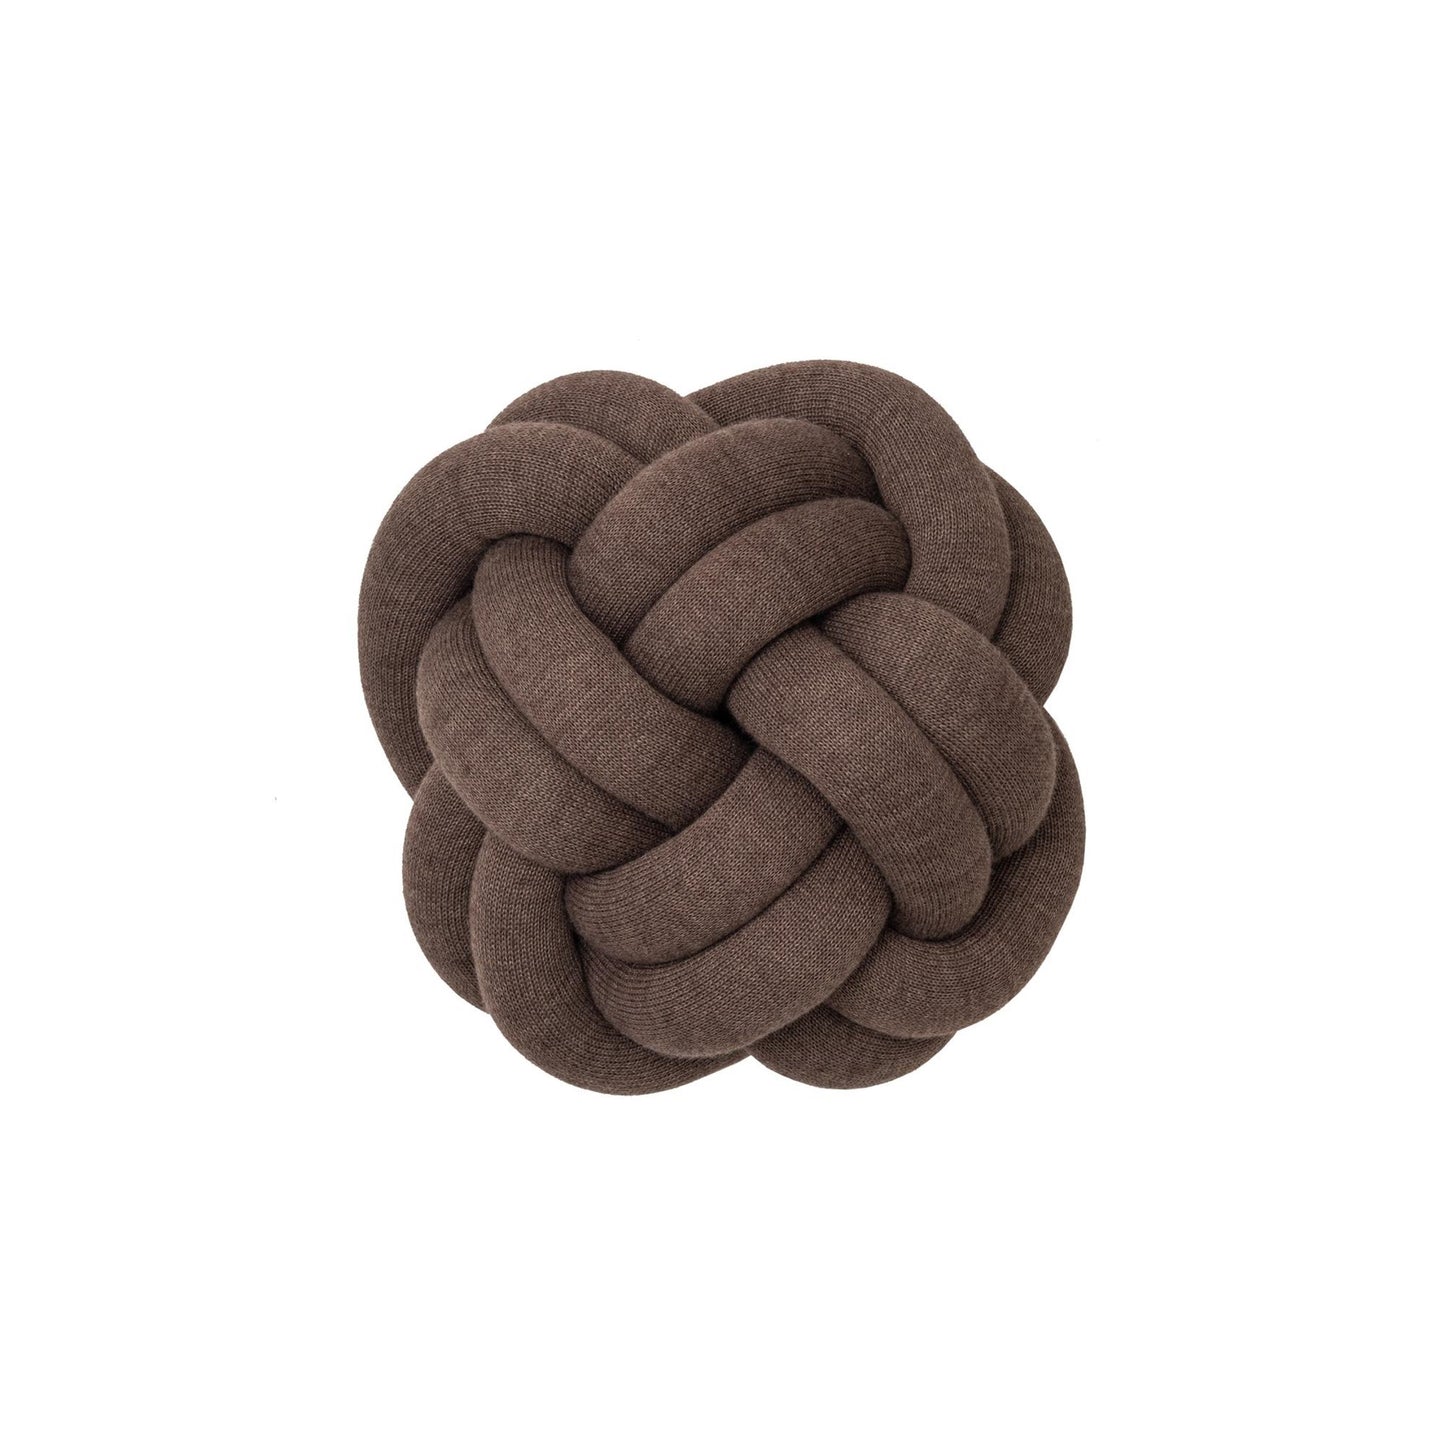 Knot Cushion by Design House Stockholm #Brown